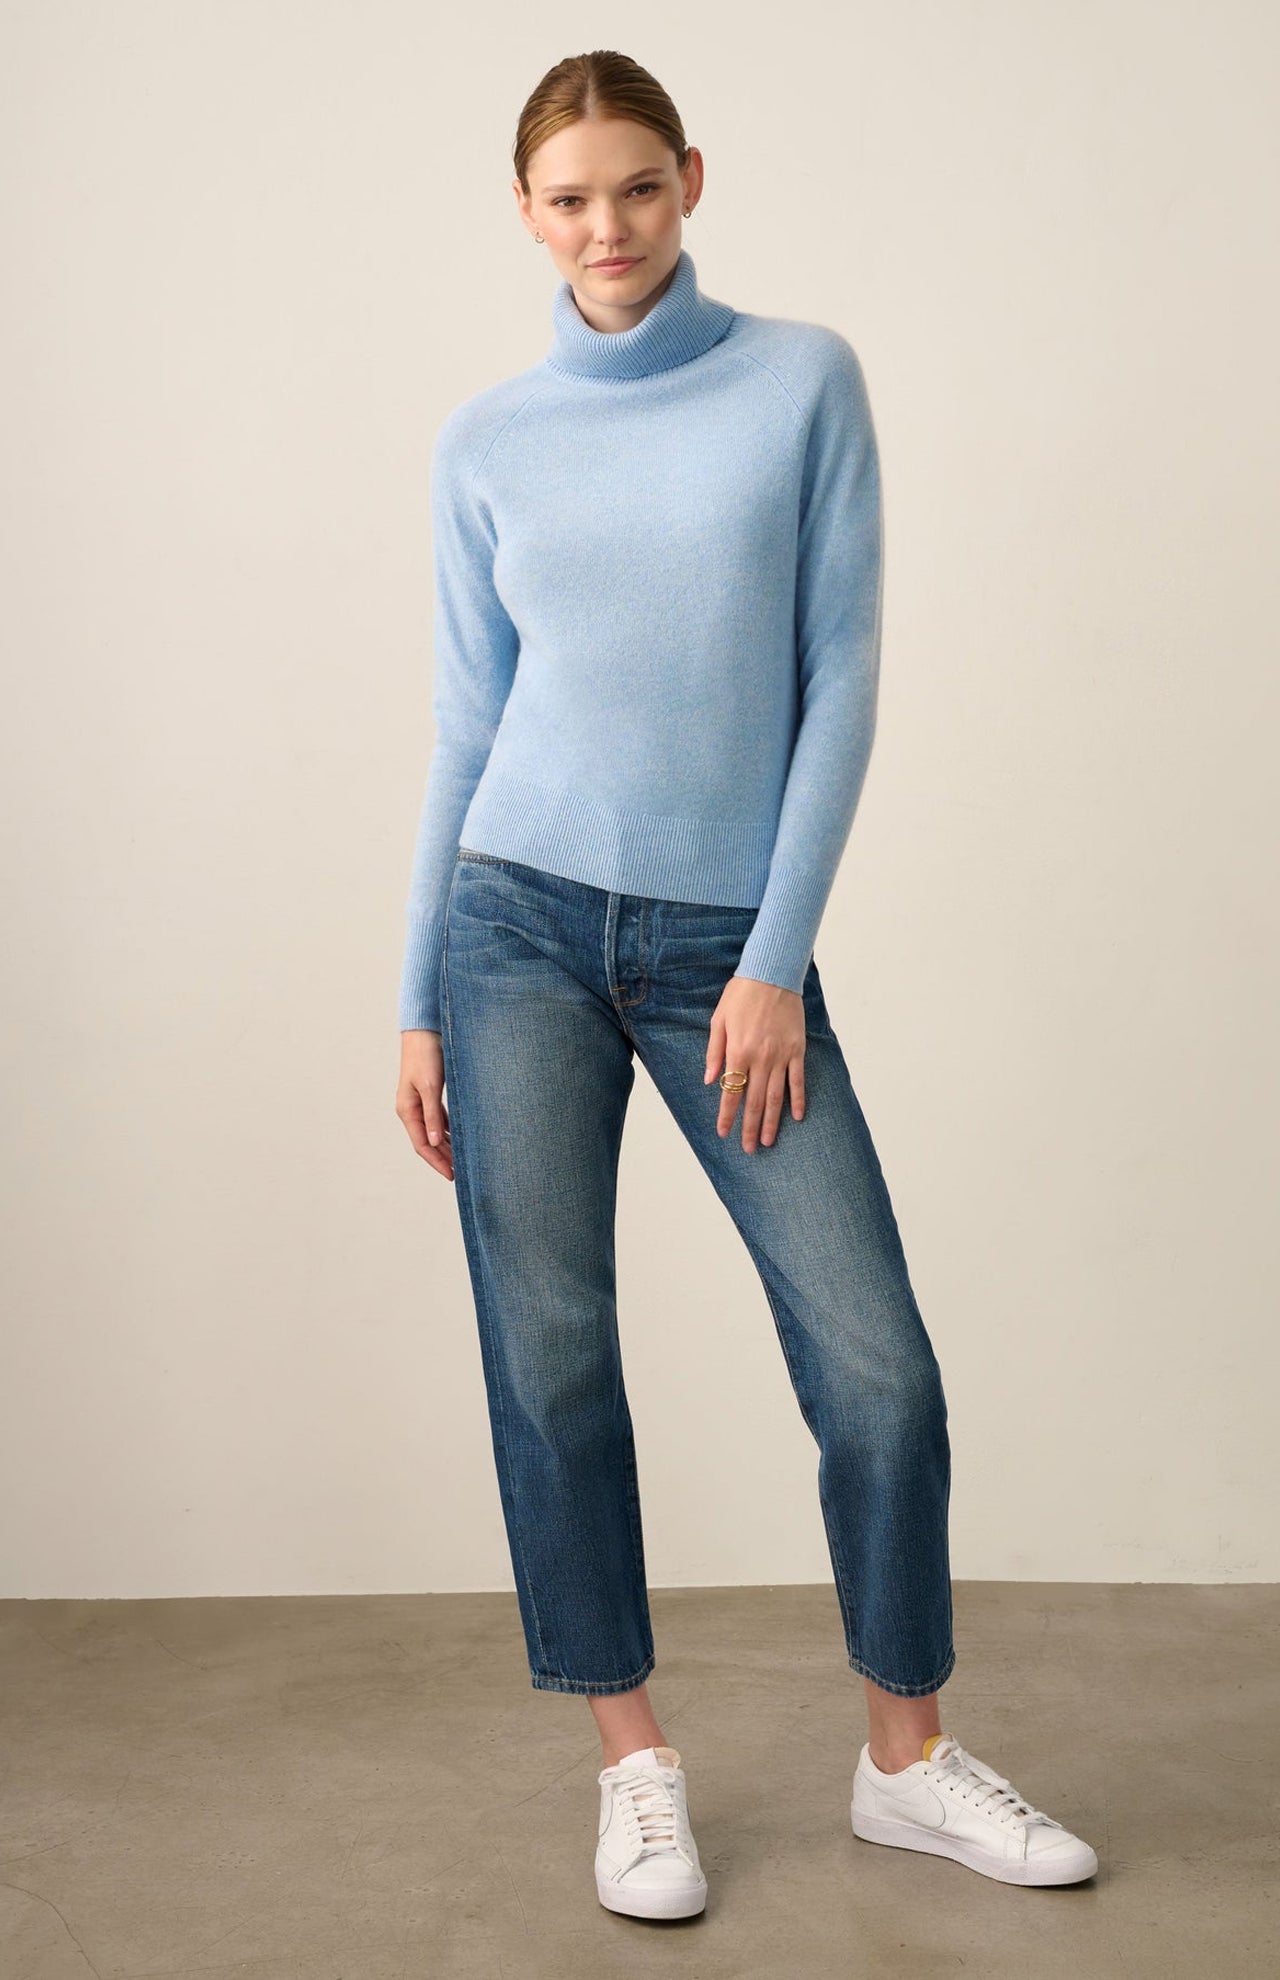 White And Warren Cashmere Essential Turtleneck Sweater Light Chambray Heather Front Full Body Model Image (6977567096947)